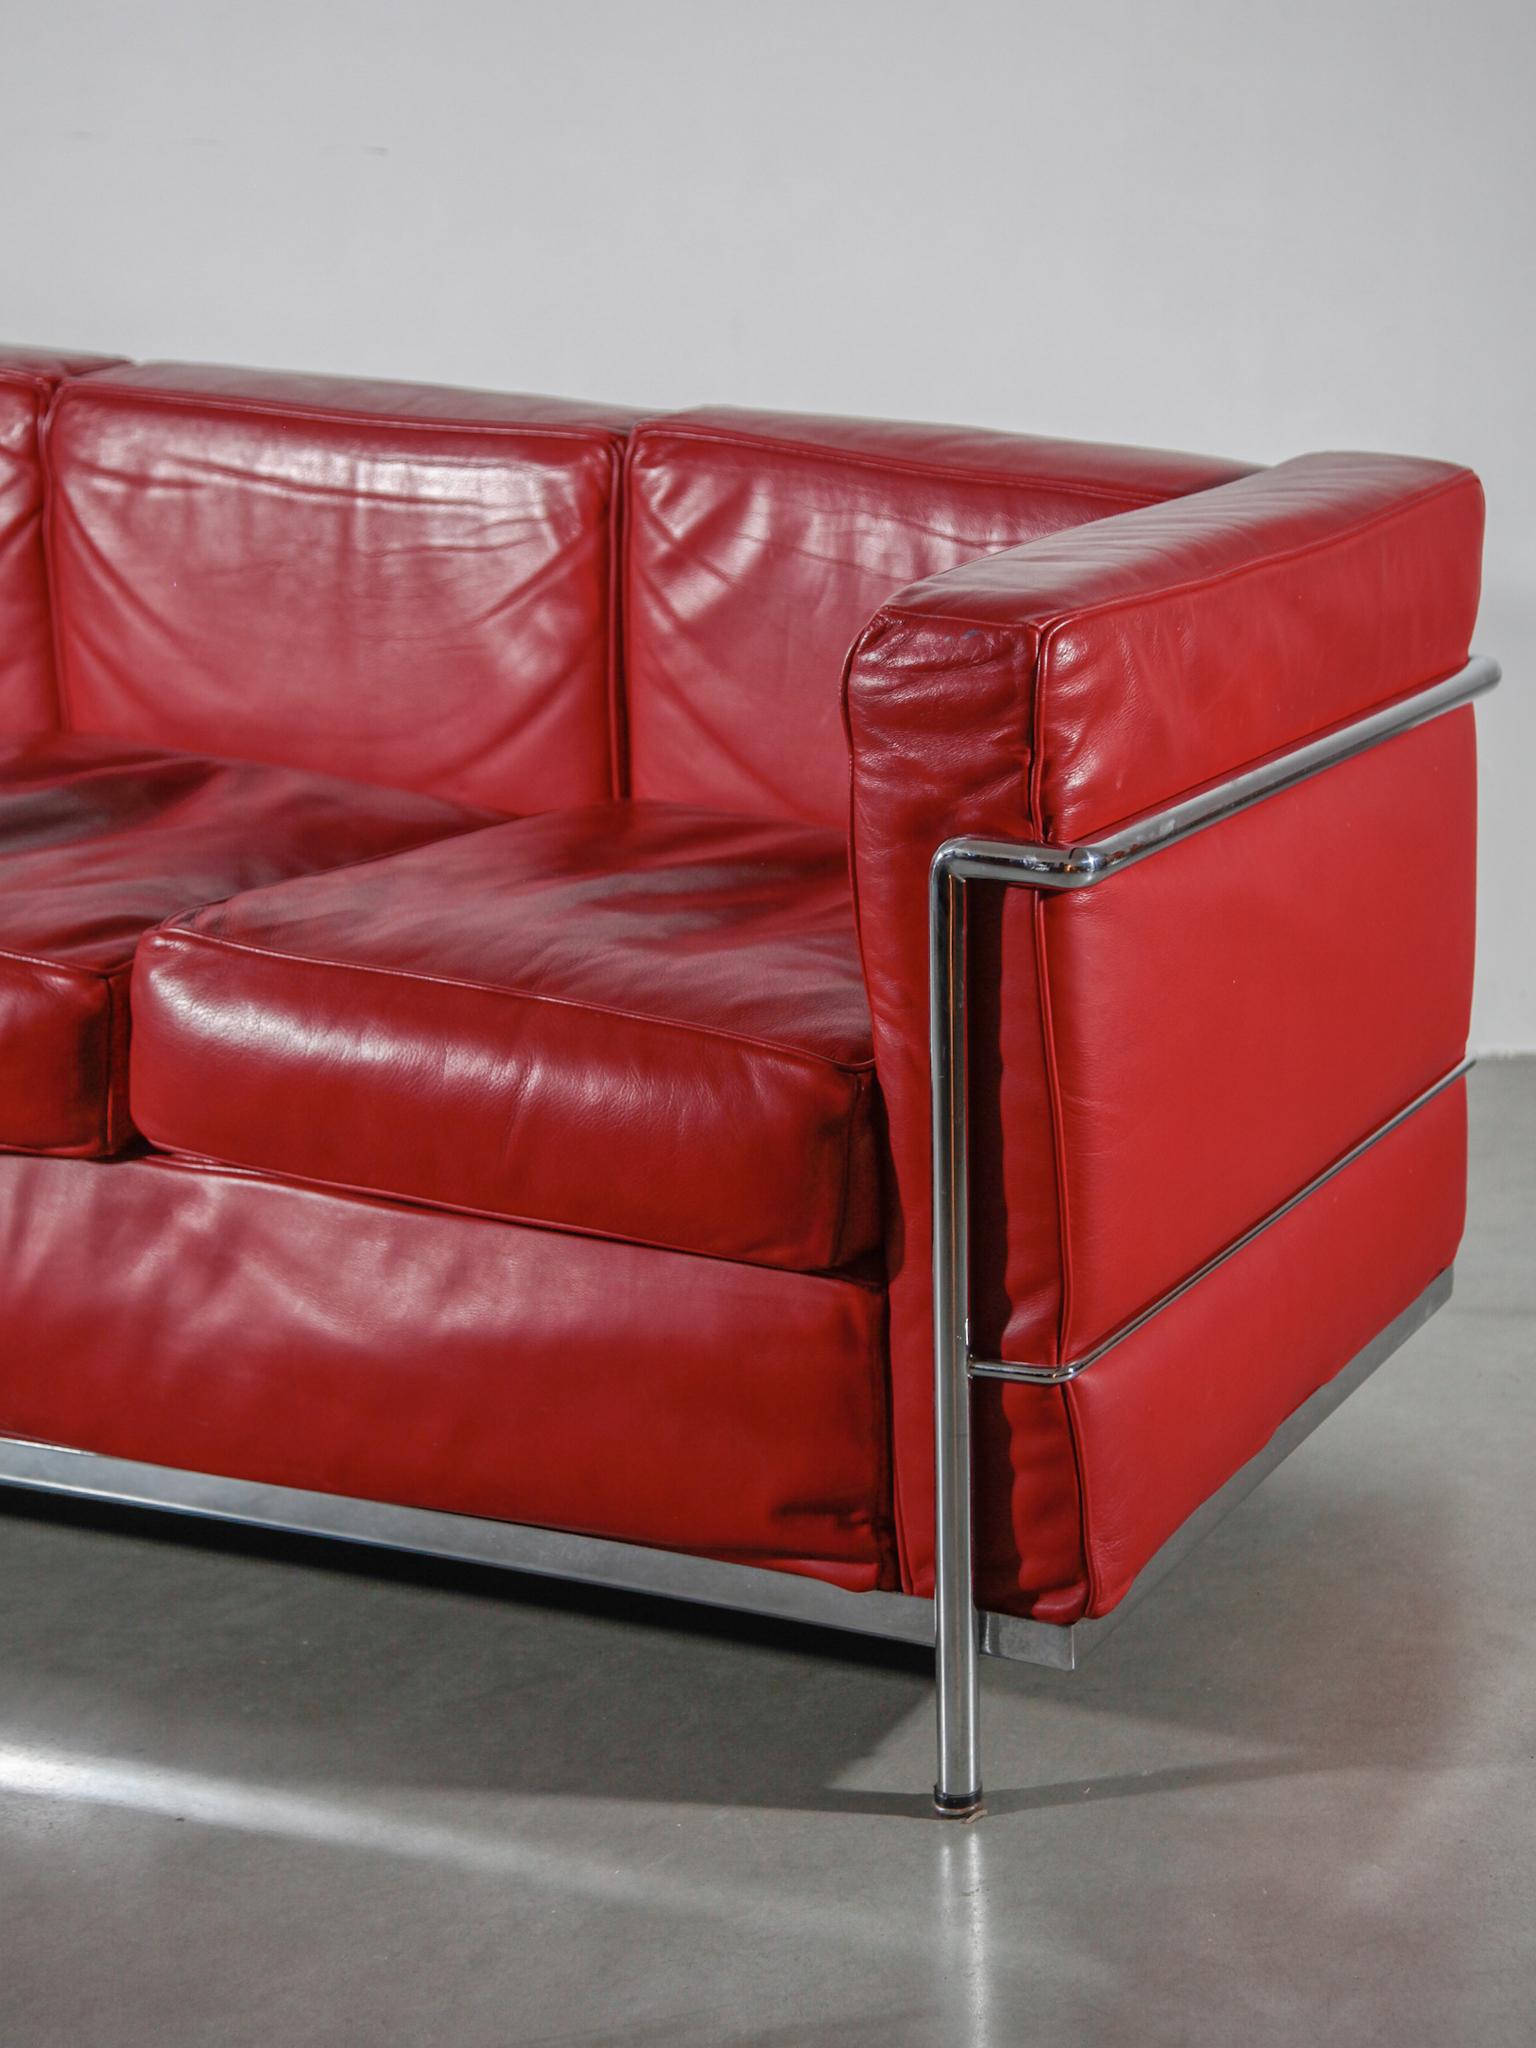 Hand-Crafted Mid-century Modern Three Seat Sofa In Red Leather, 1980s attributed Le Corbusier